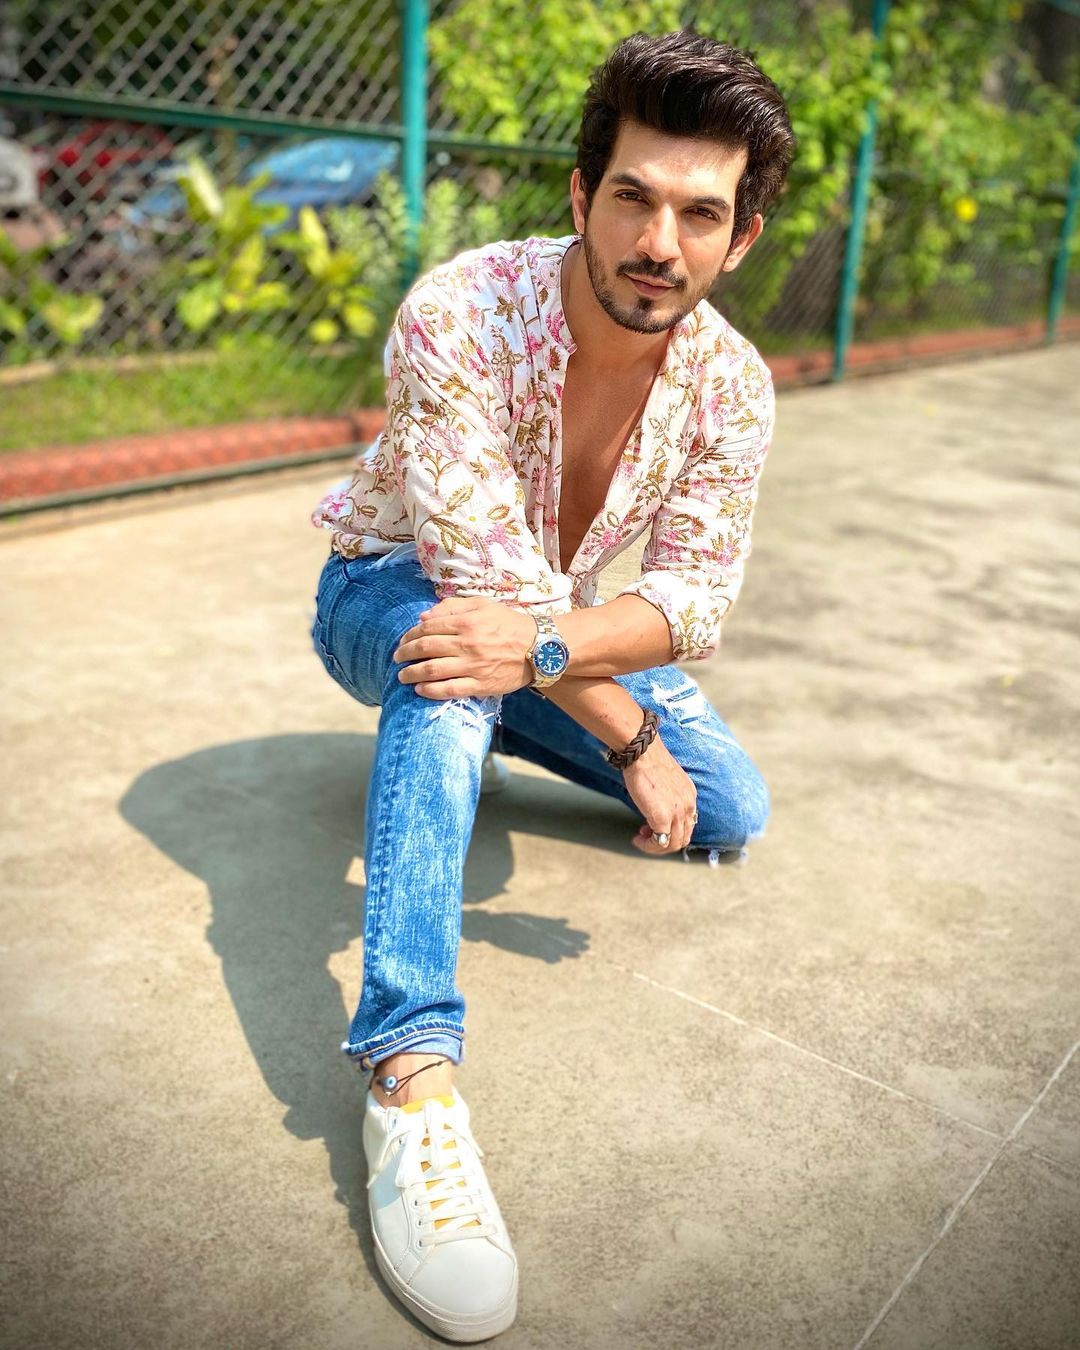 In Pics! Check Out Parth Samthaan, Arjun Bijlani, And Zain Imam's Best Looks In 2020 6